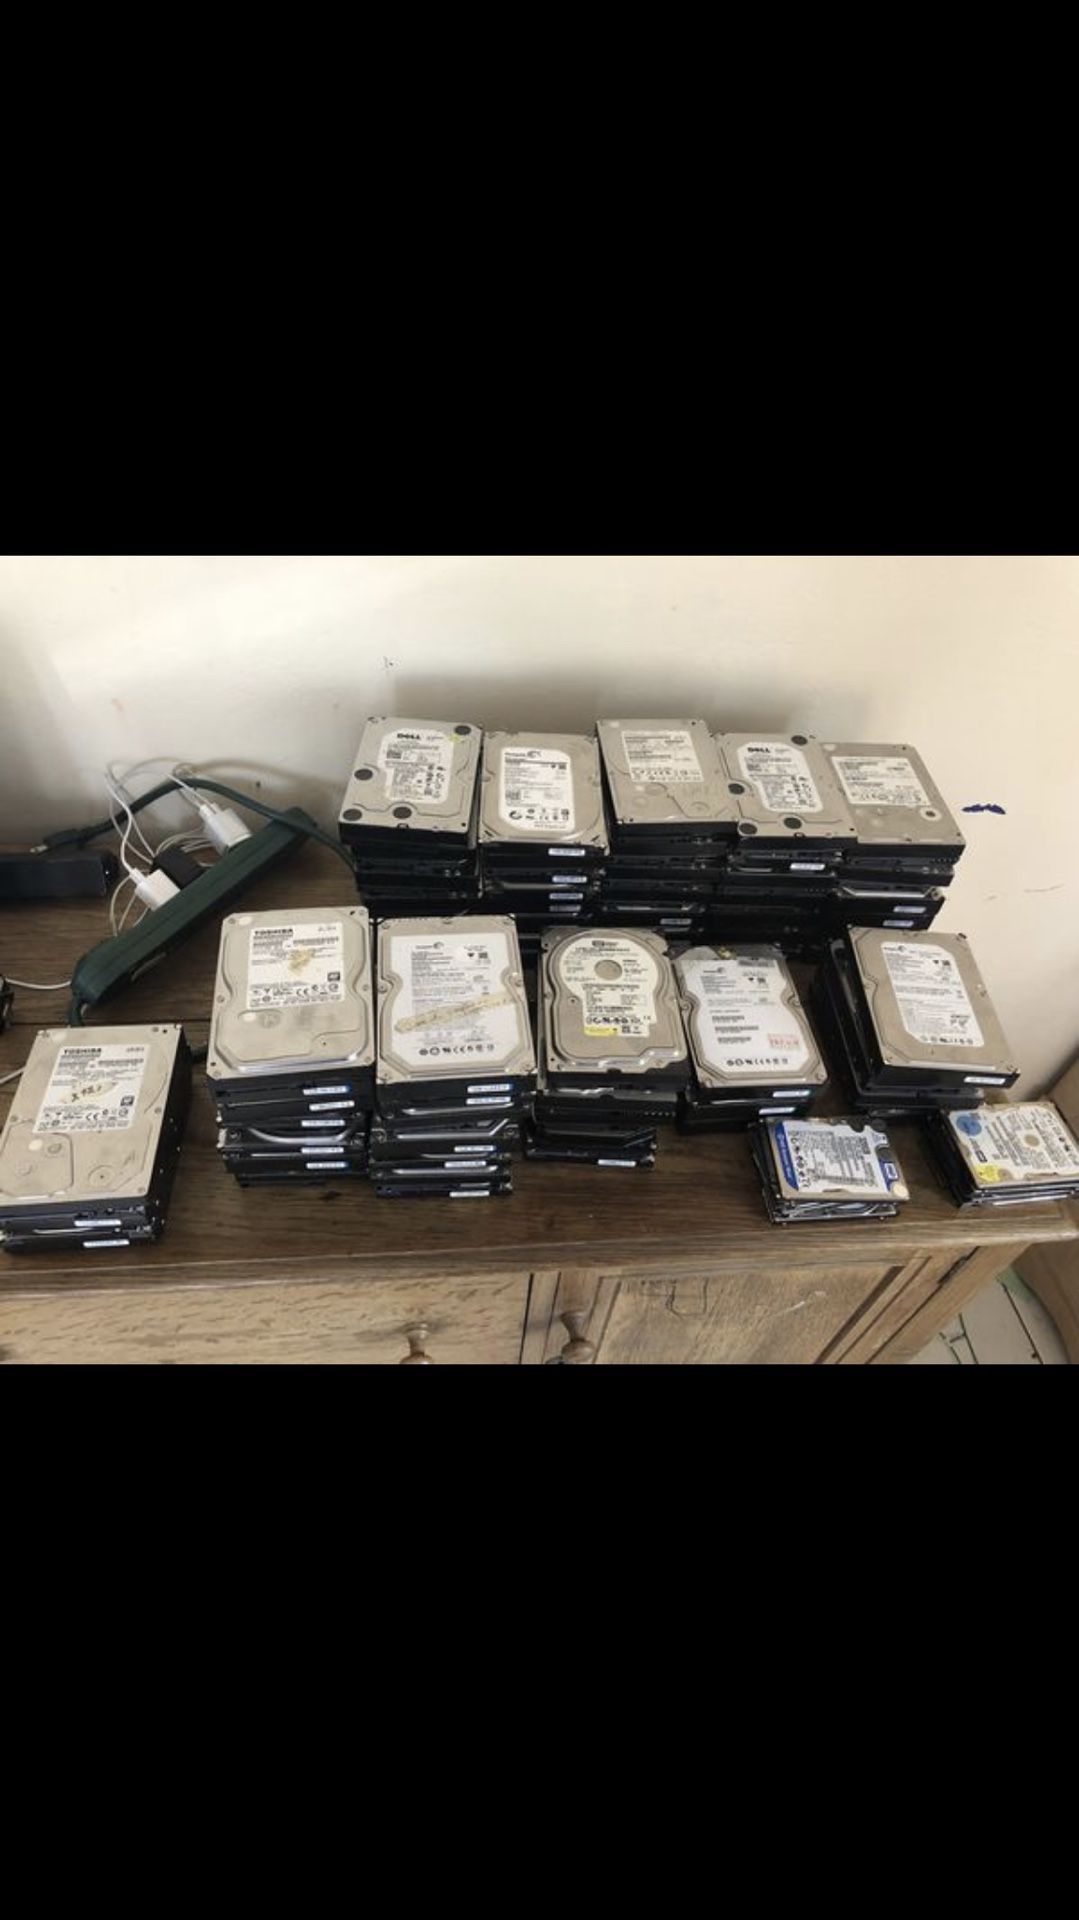 Lot of bad desktop hard drives, can be used for recycling or parts... i tested them by formatting and dis not pass the test.... see pictures!